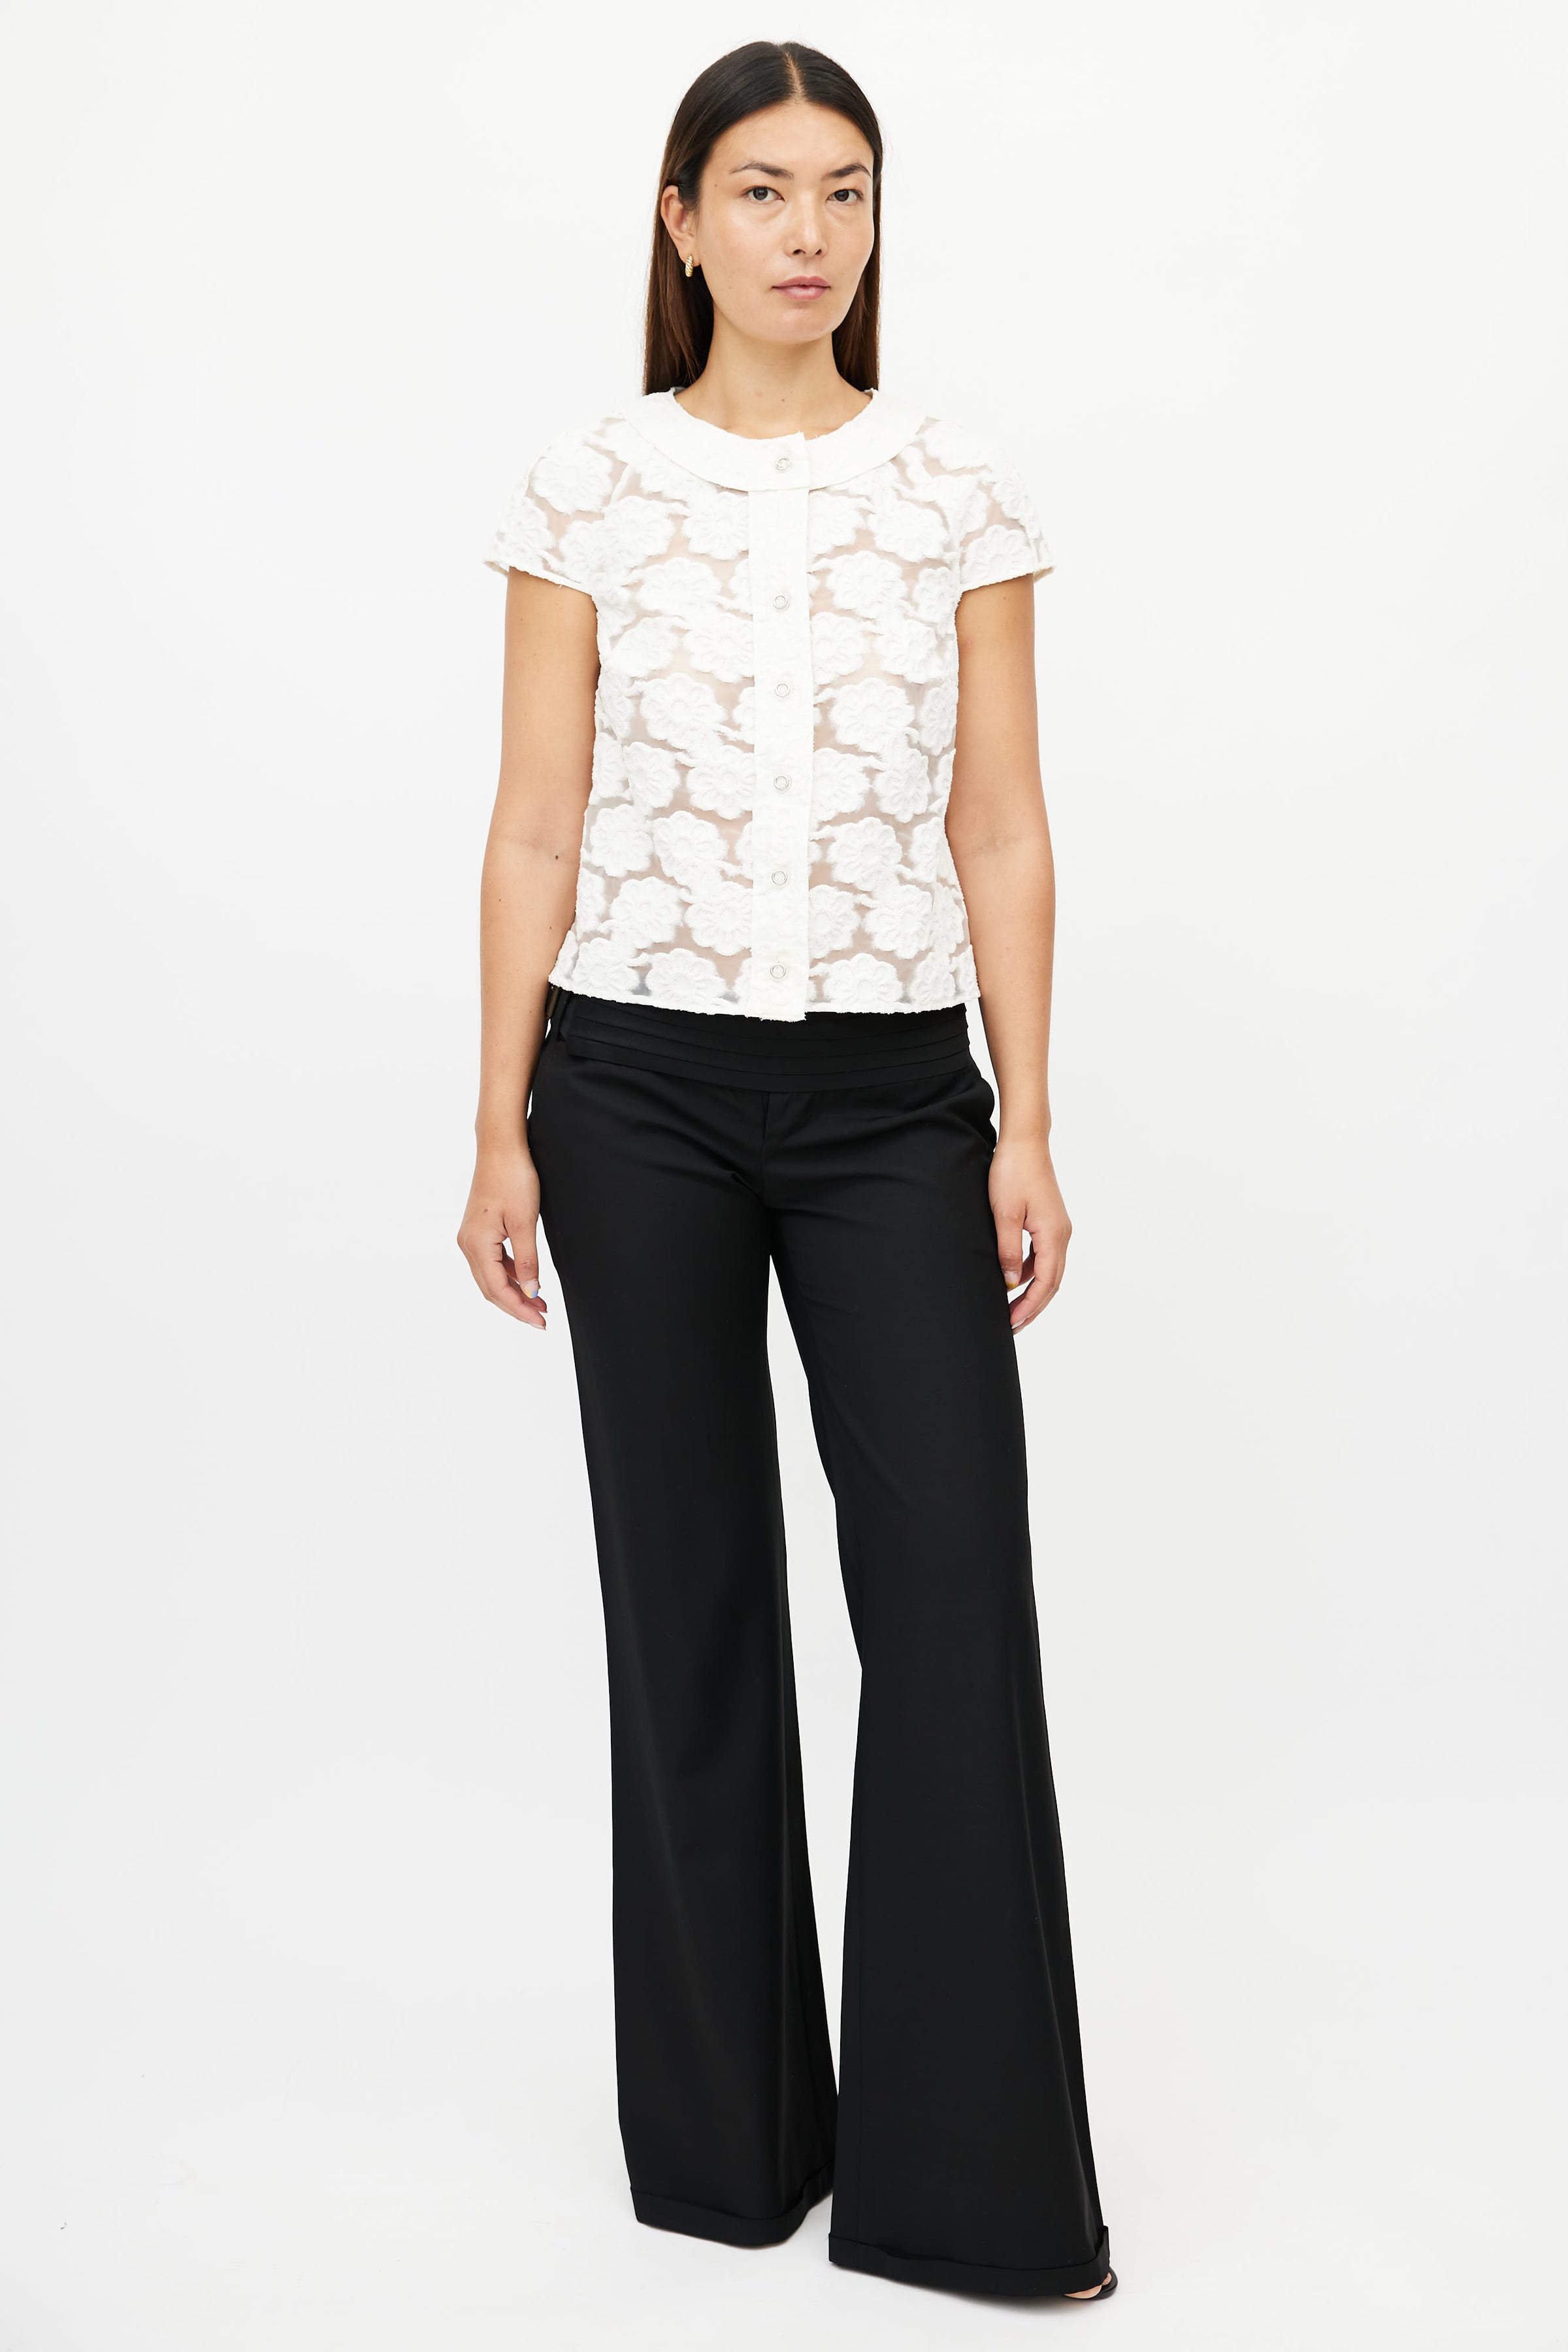 Chanel // Resort 2009 White Brocade Blouse – VSP Consignment